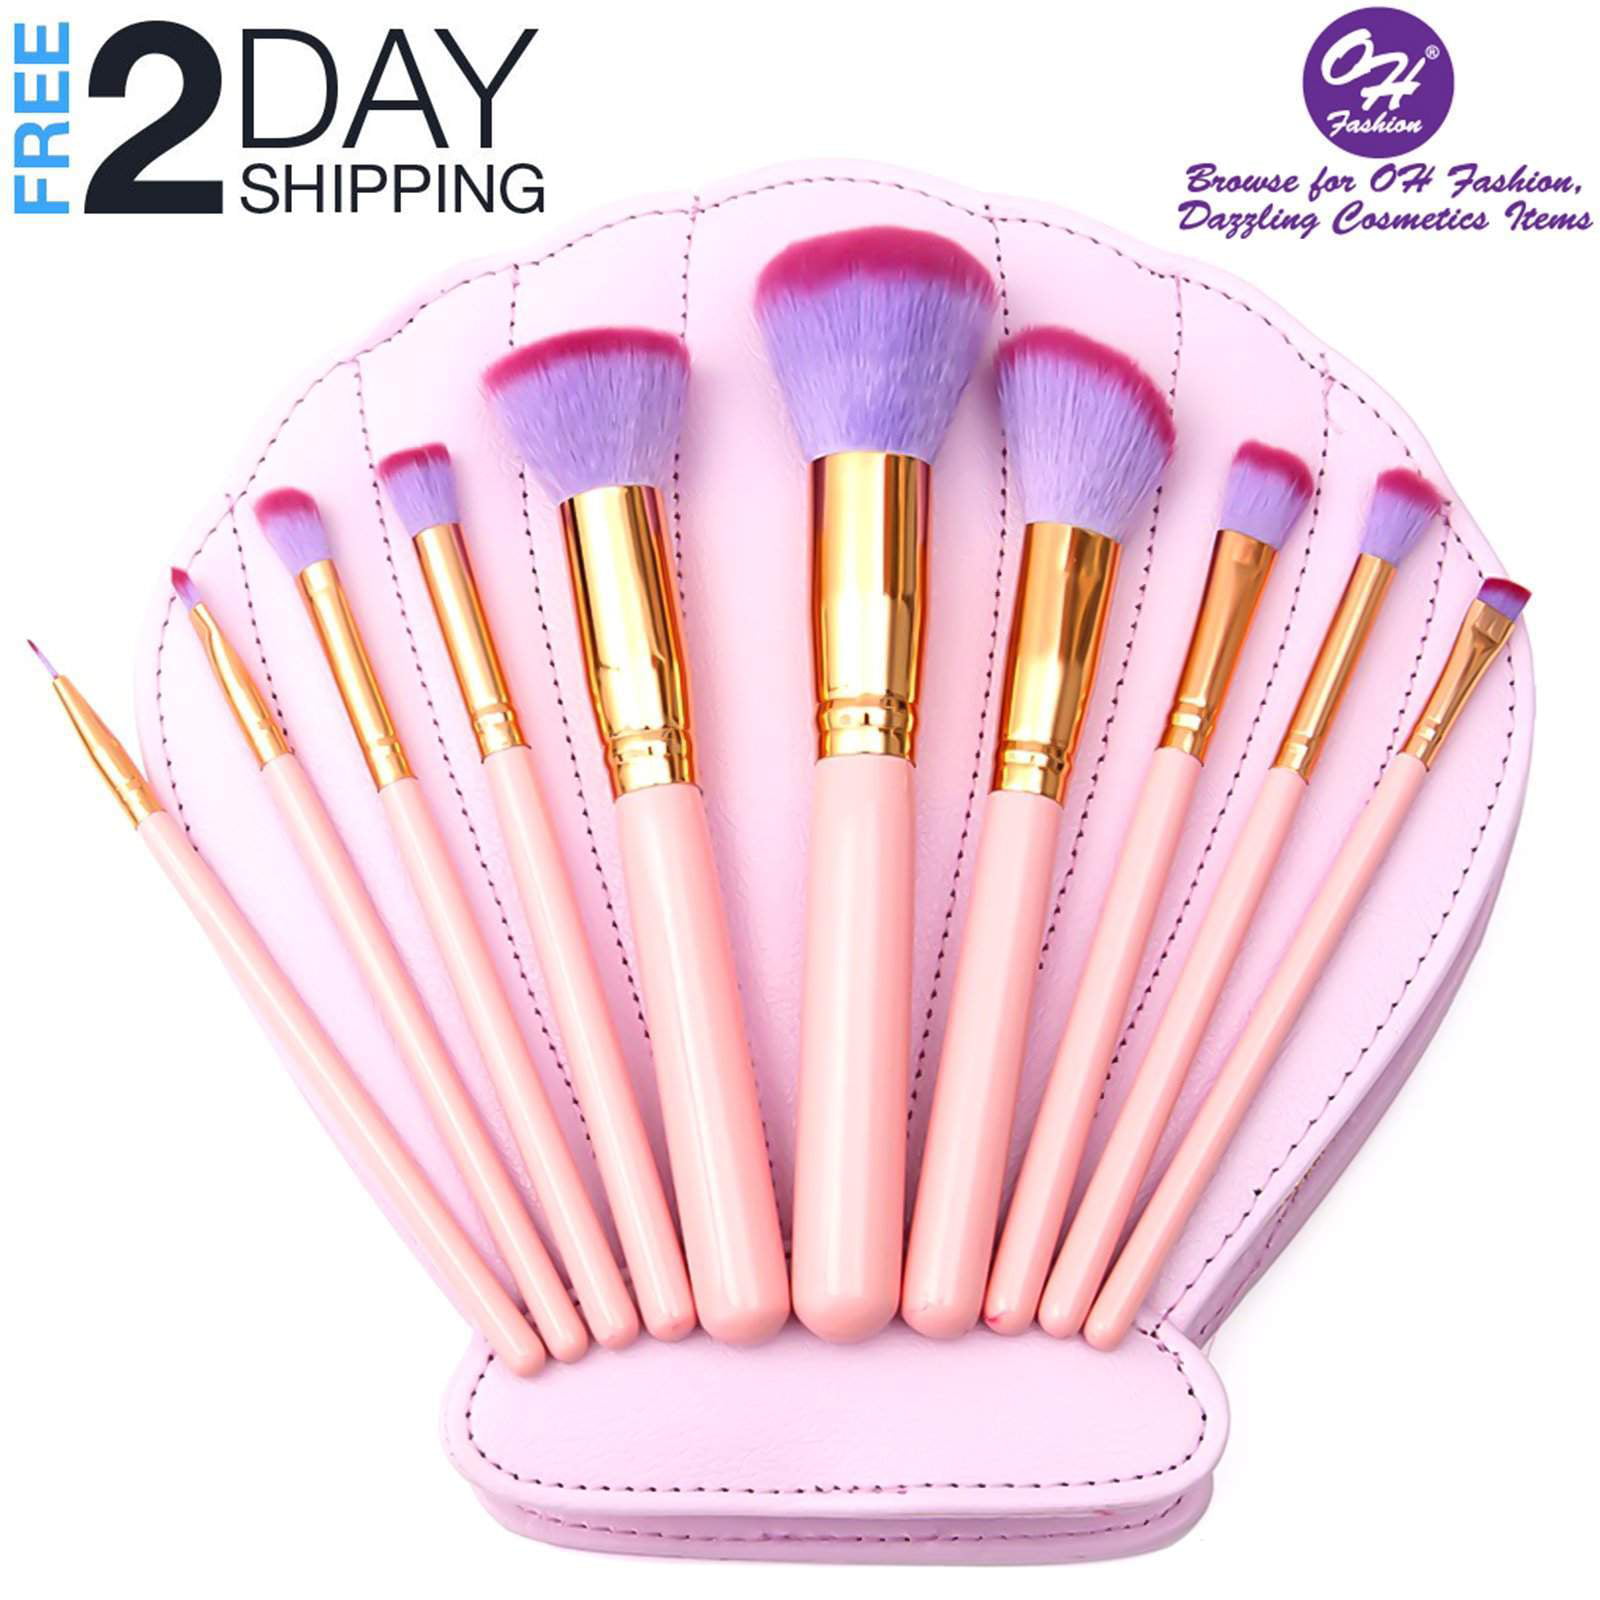 Makeup brushes with a mermaid shell case